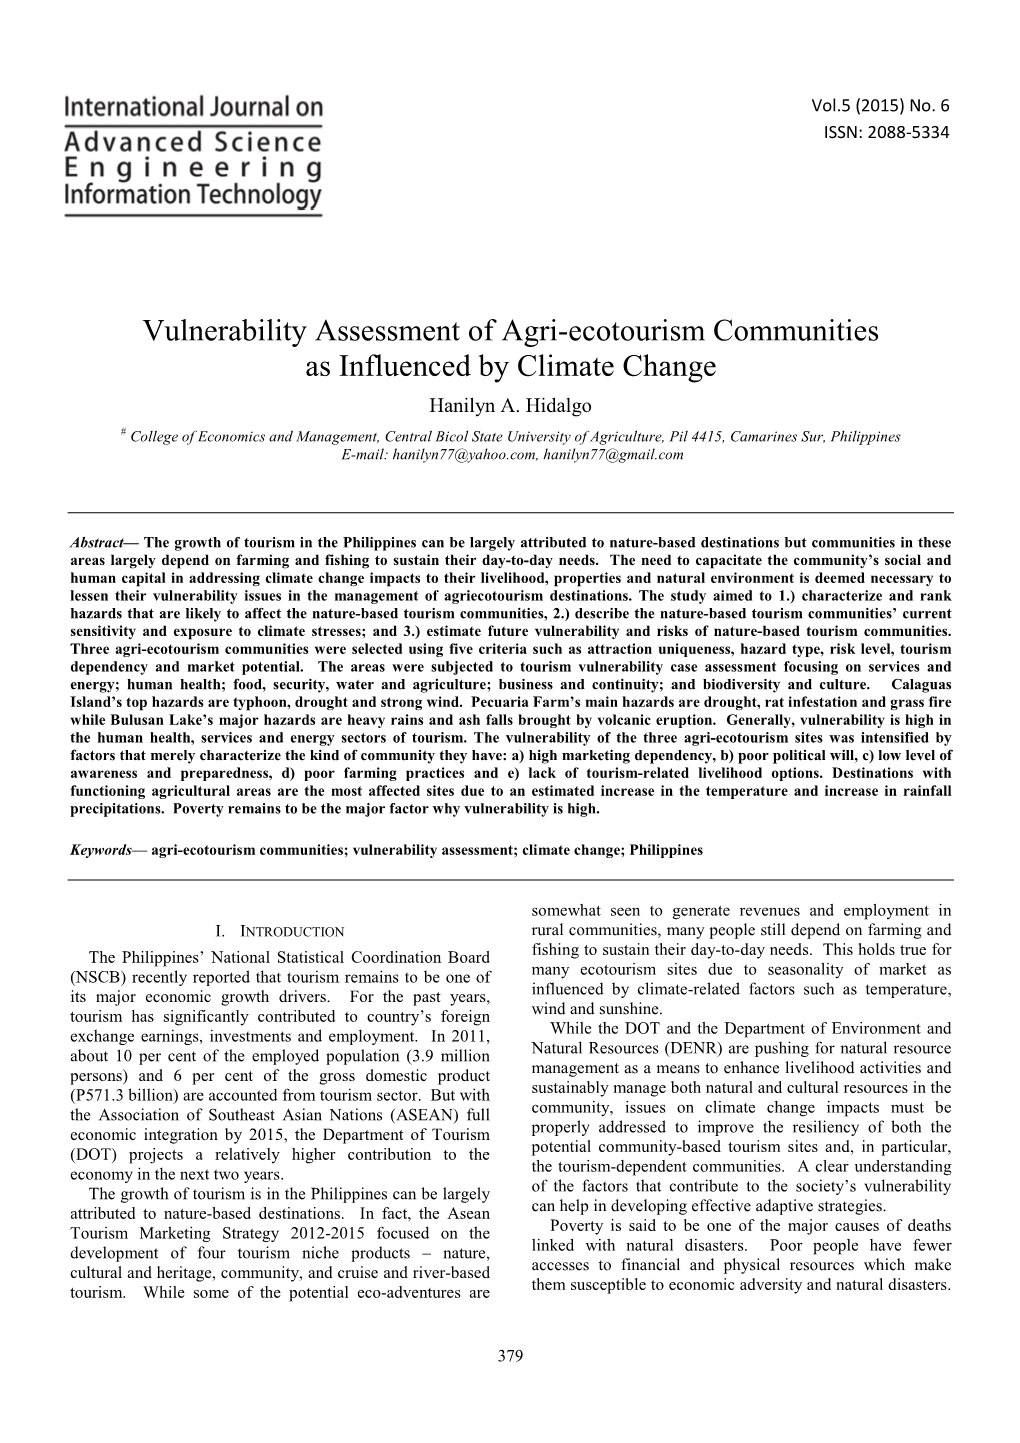 Vulnerability Assessment of Agri-Ecotourism Communities As Influenced by Climate Change Hanilyn A